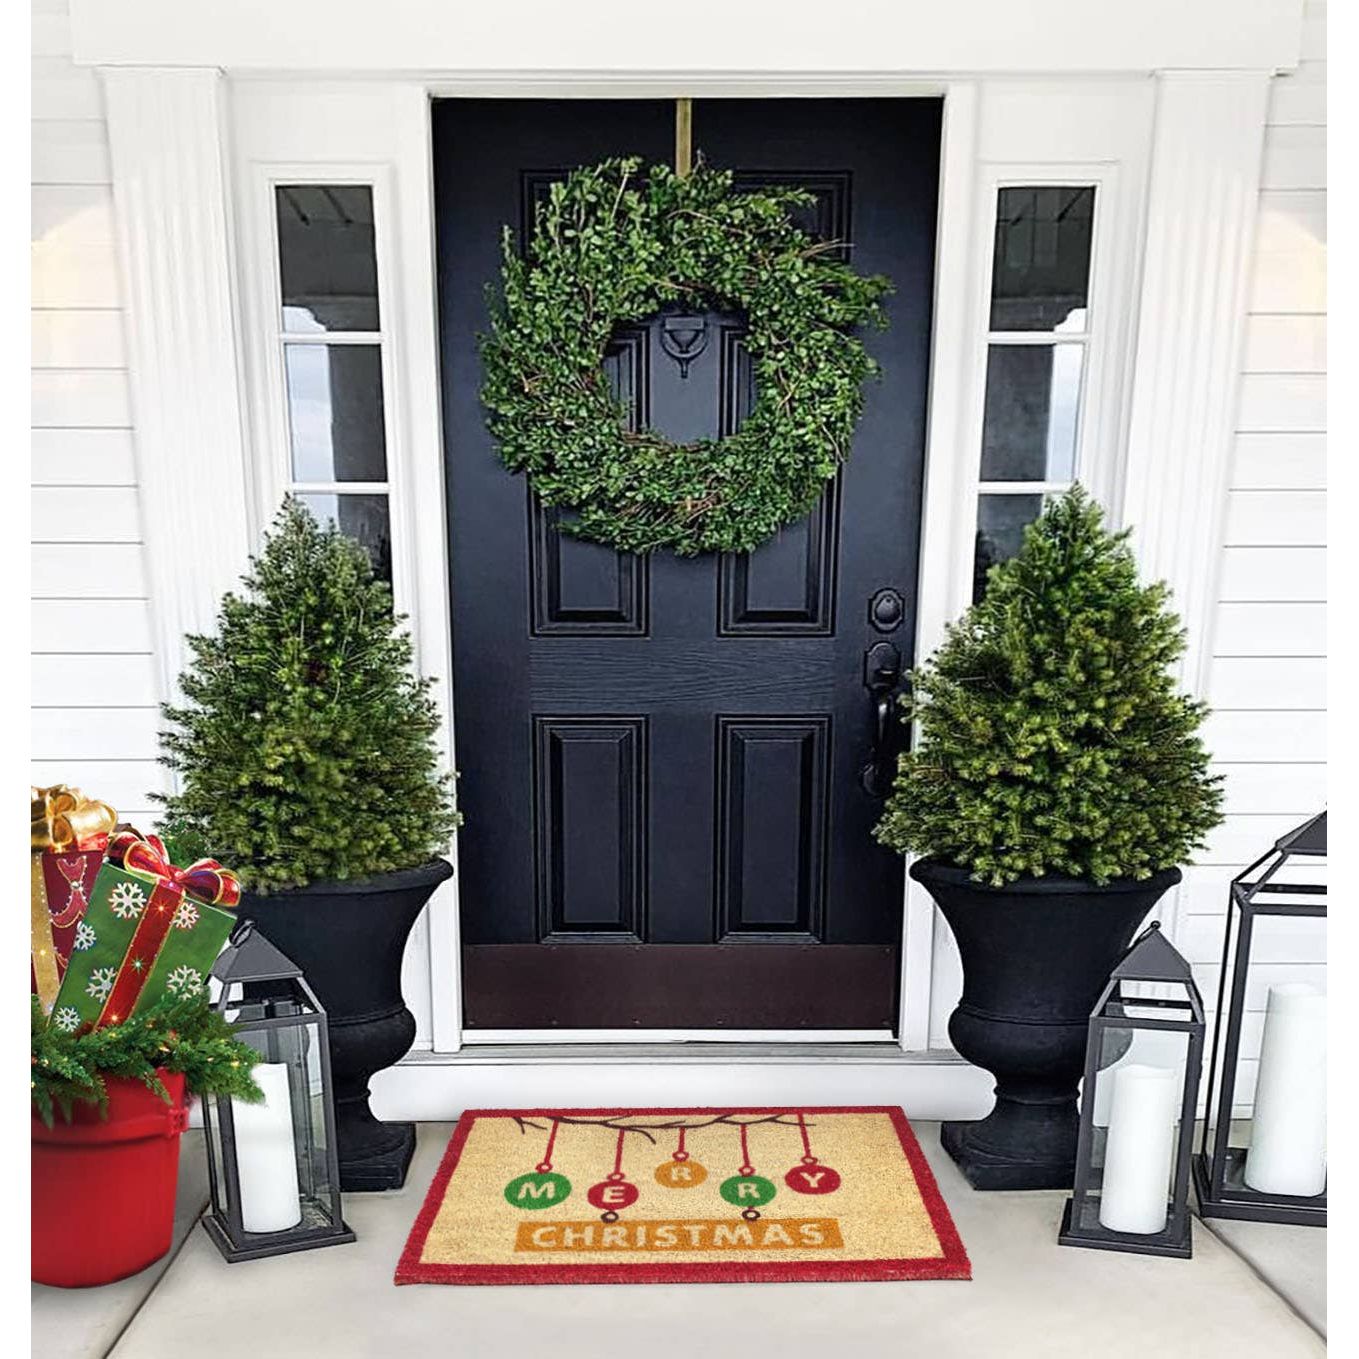 RugSmith Multi Ornaments Merry Christmas Doormat, 18" x 30"Heart